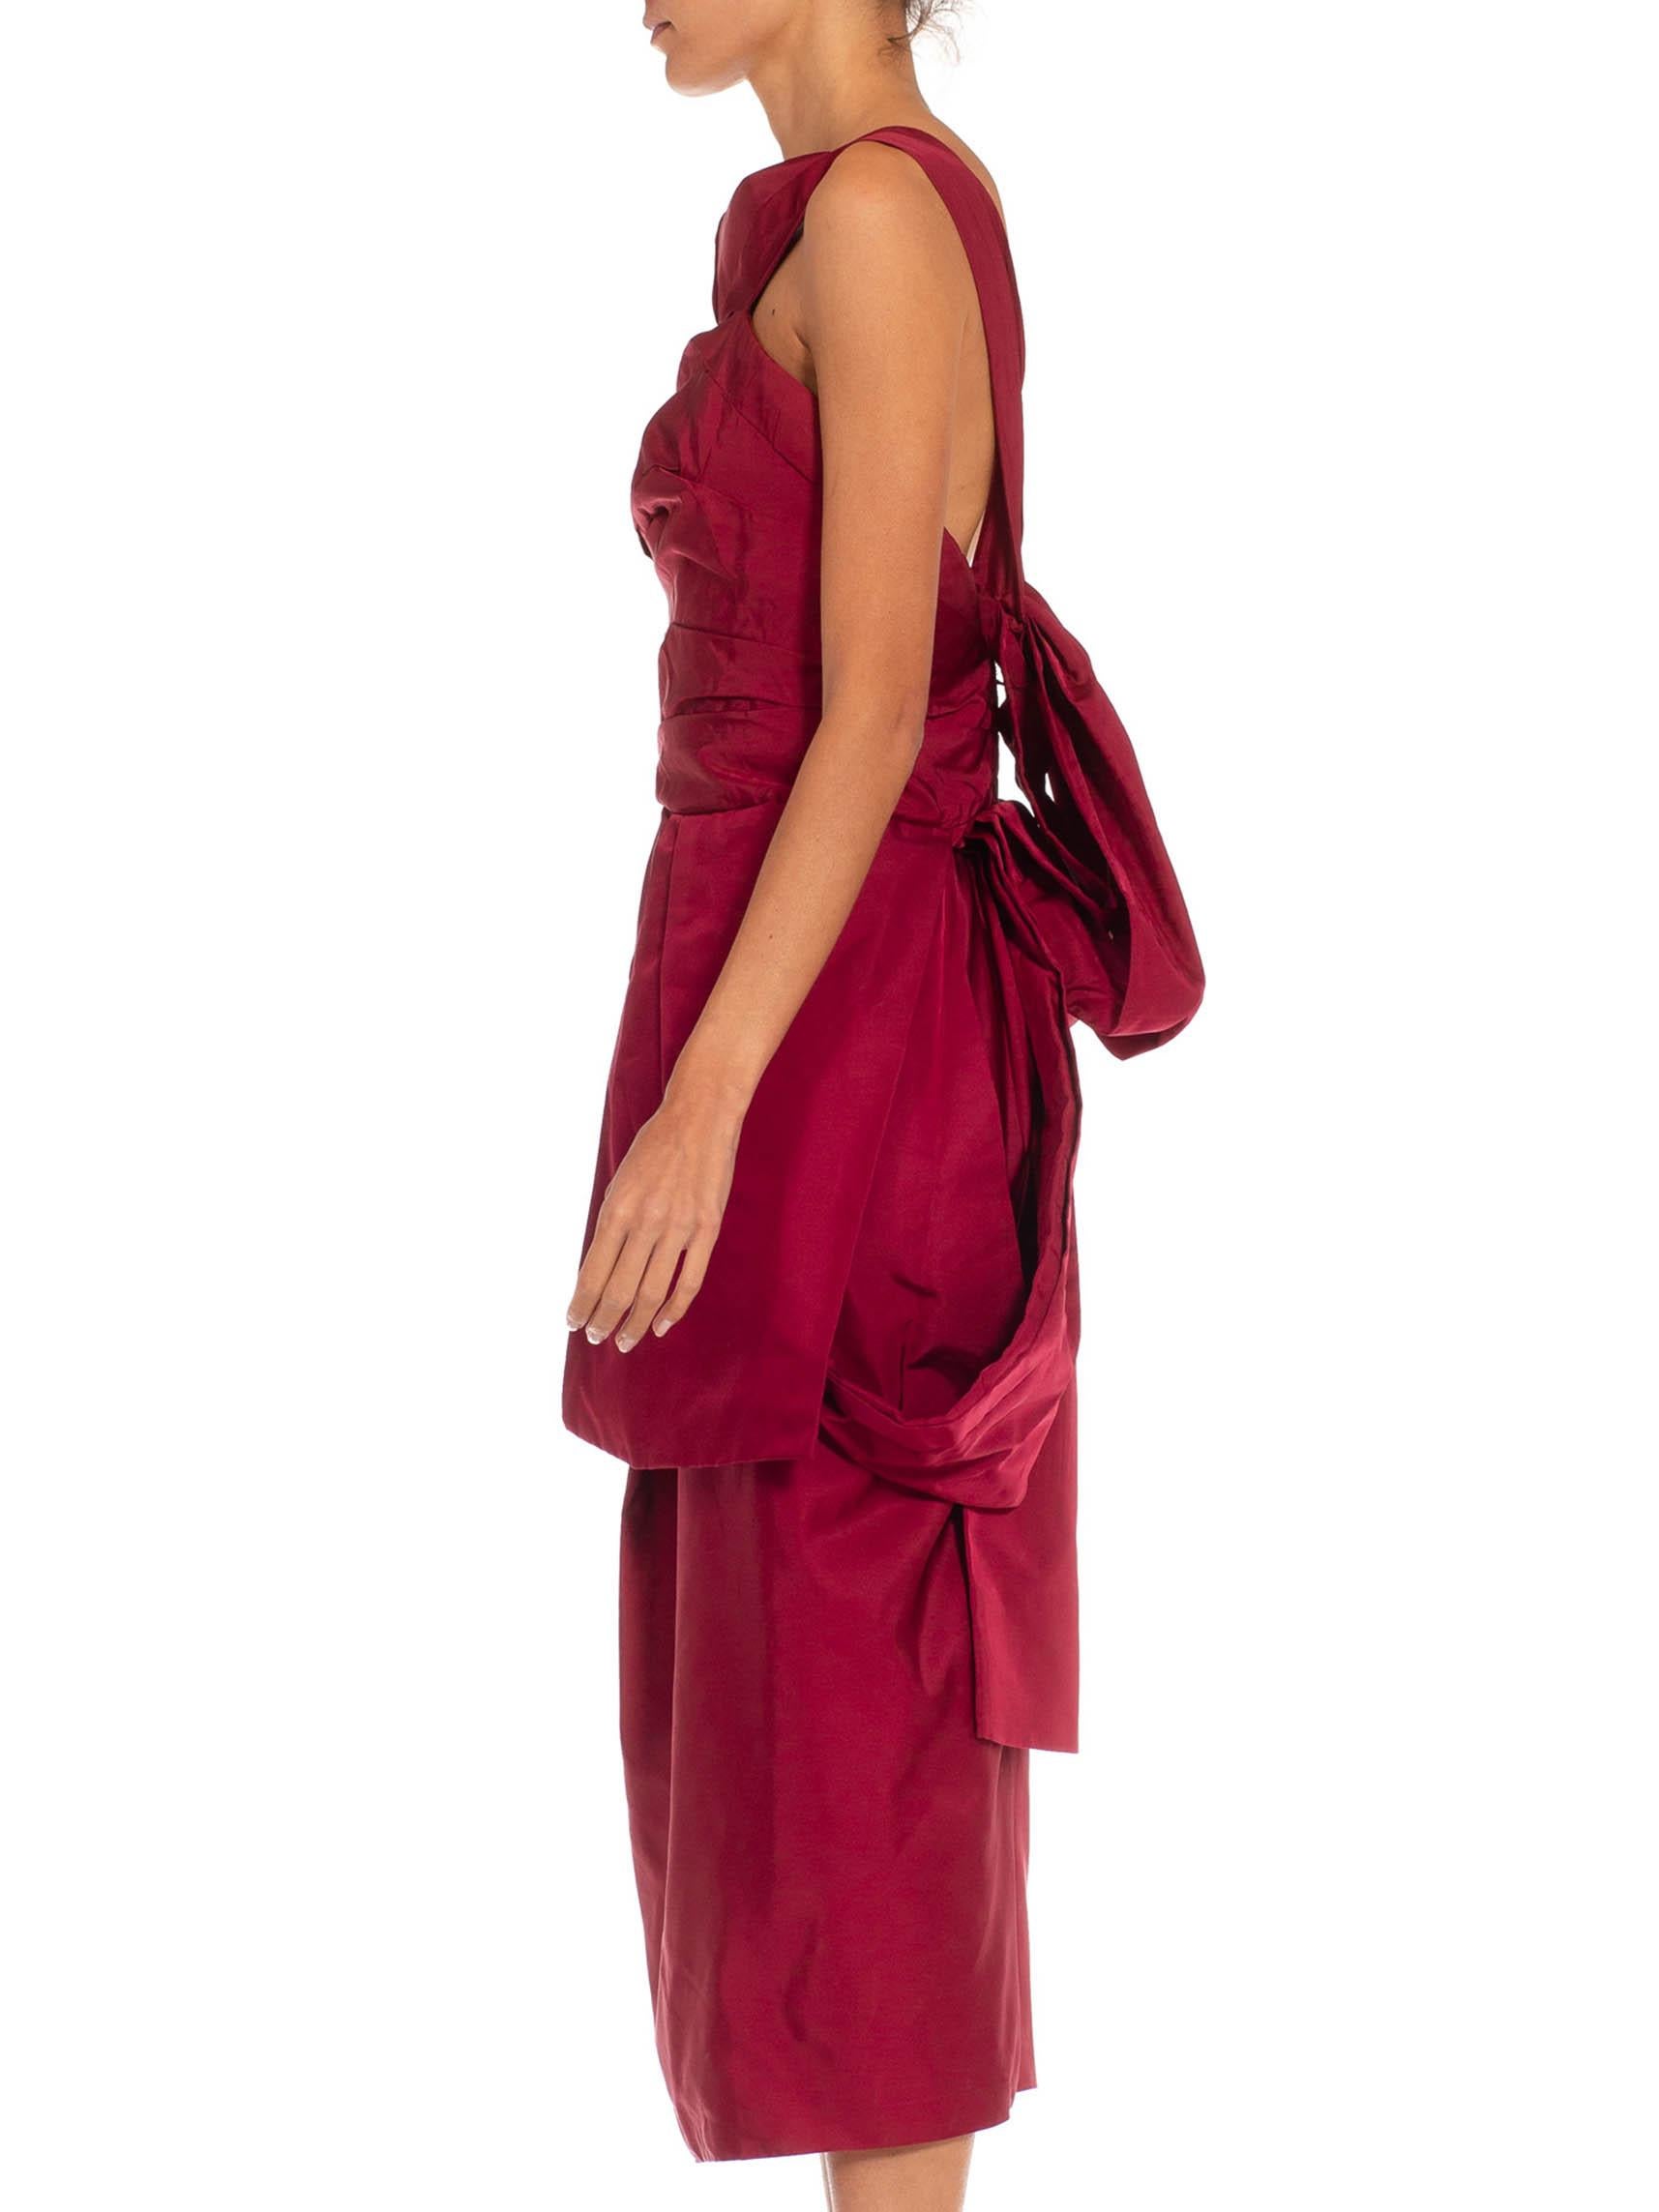 2000S Marc Jacobs Burgundy Silk Taffeta Cocktail Dress In Excellent Condition For Sale In New York, NY